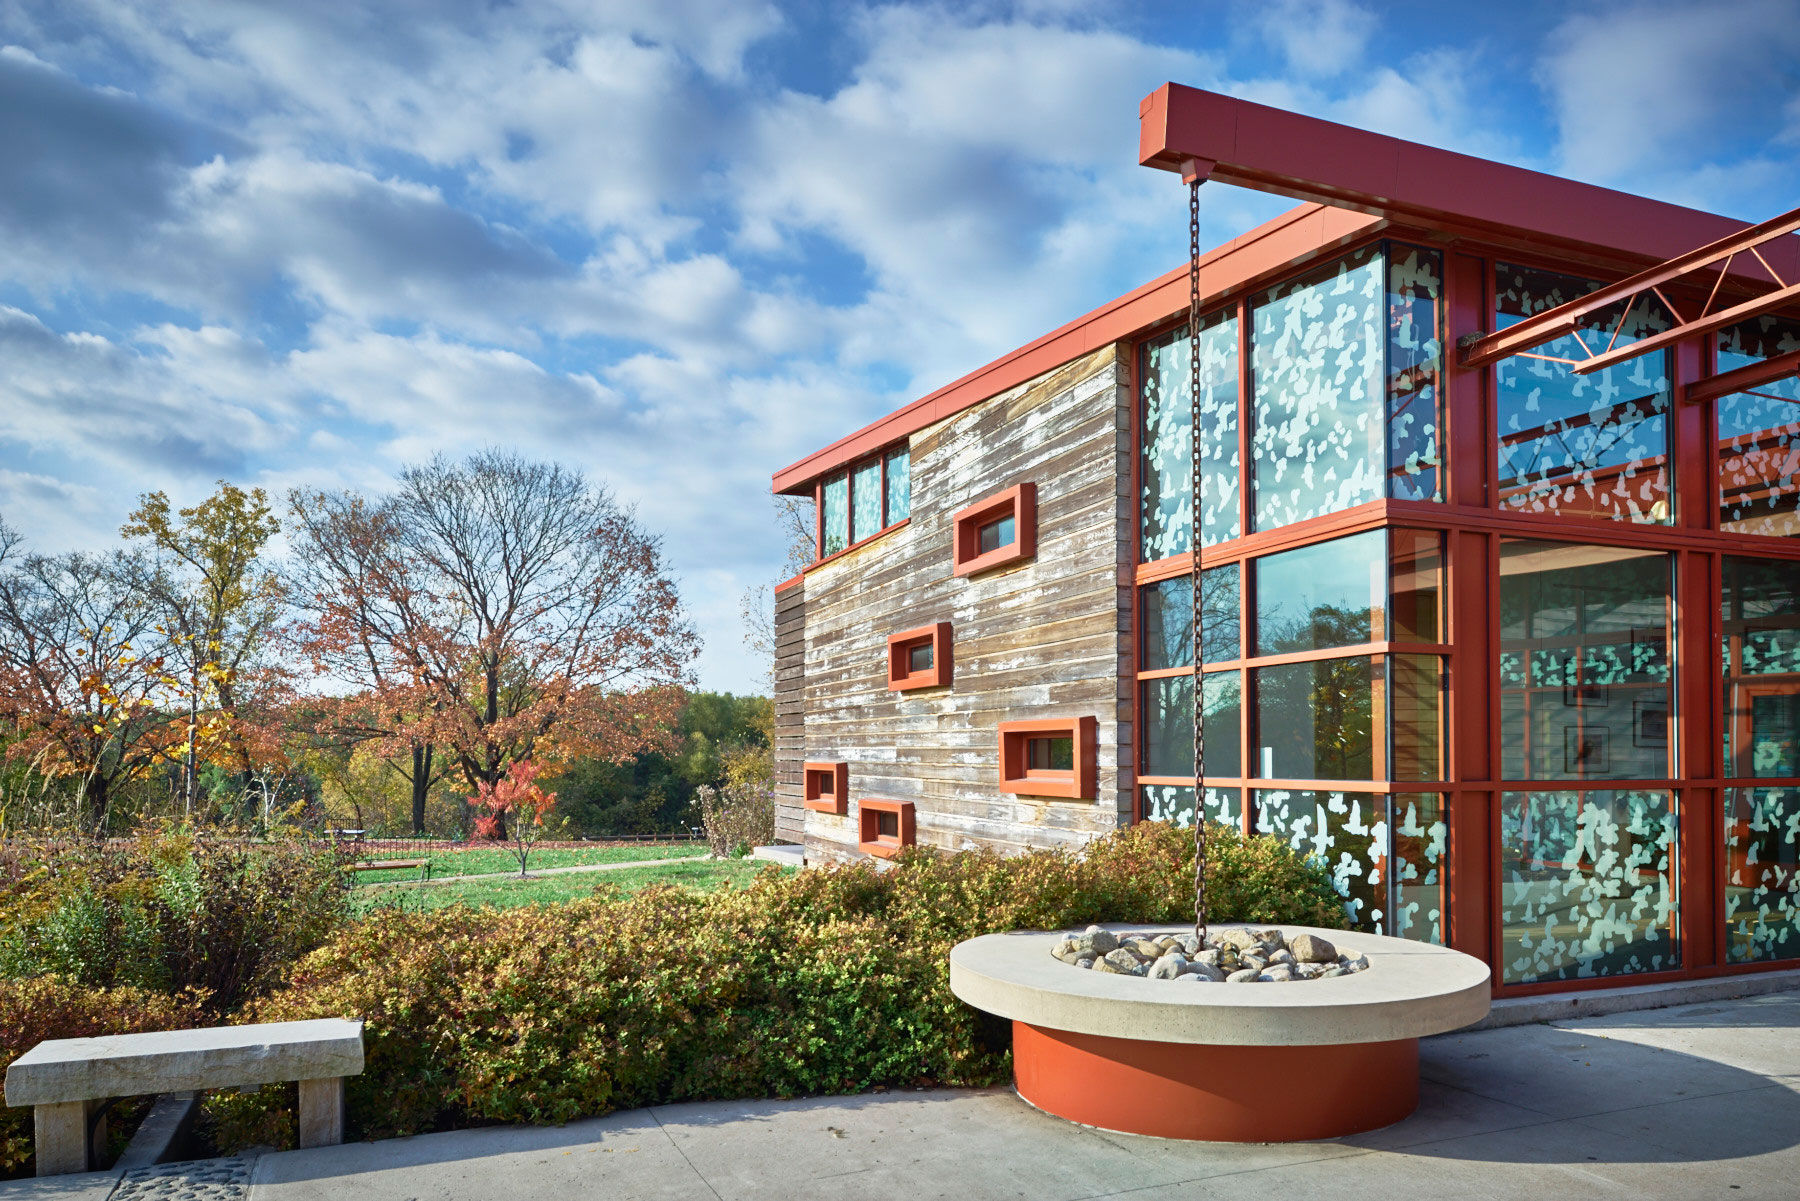  The Grange Insurance Audubon Center designed by Design Group is an architectural treasure. It is located on a former brownfield in the Whittier Peninsula, merely 1 mile from downtown Columbus. 